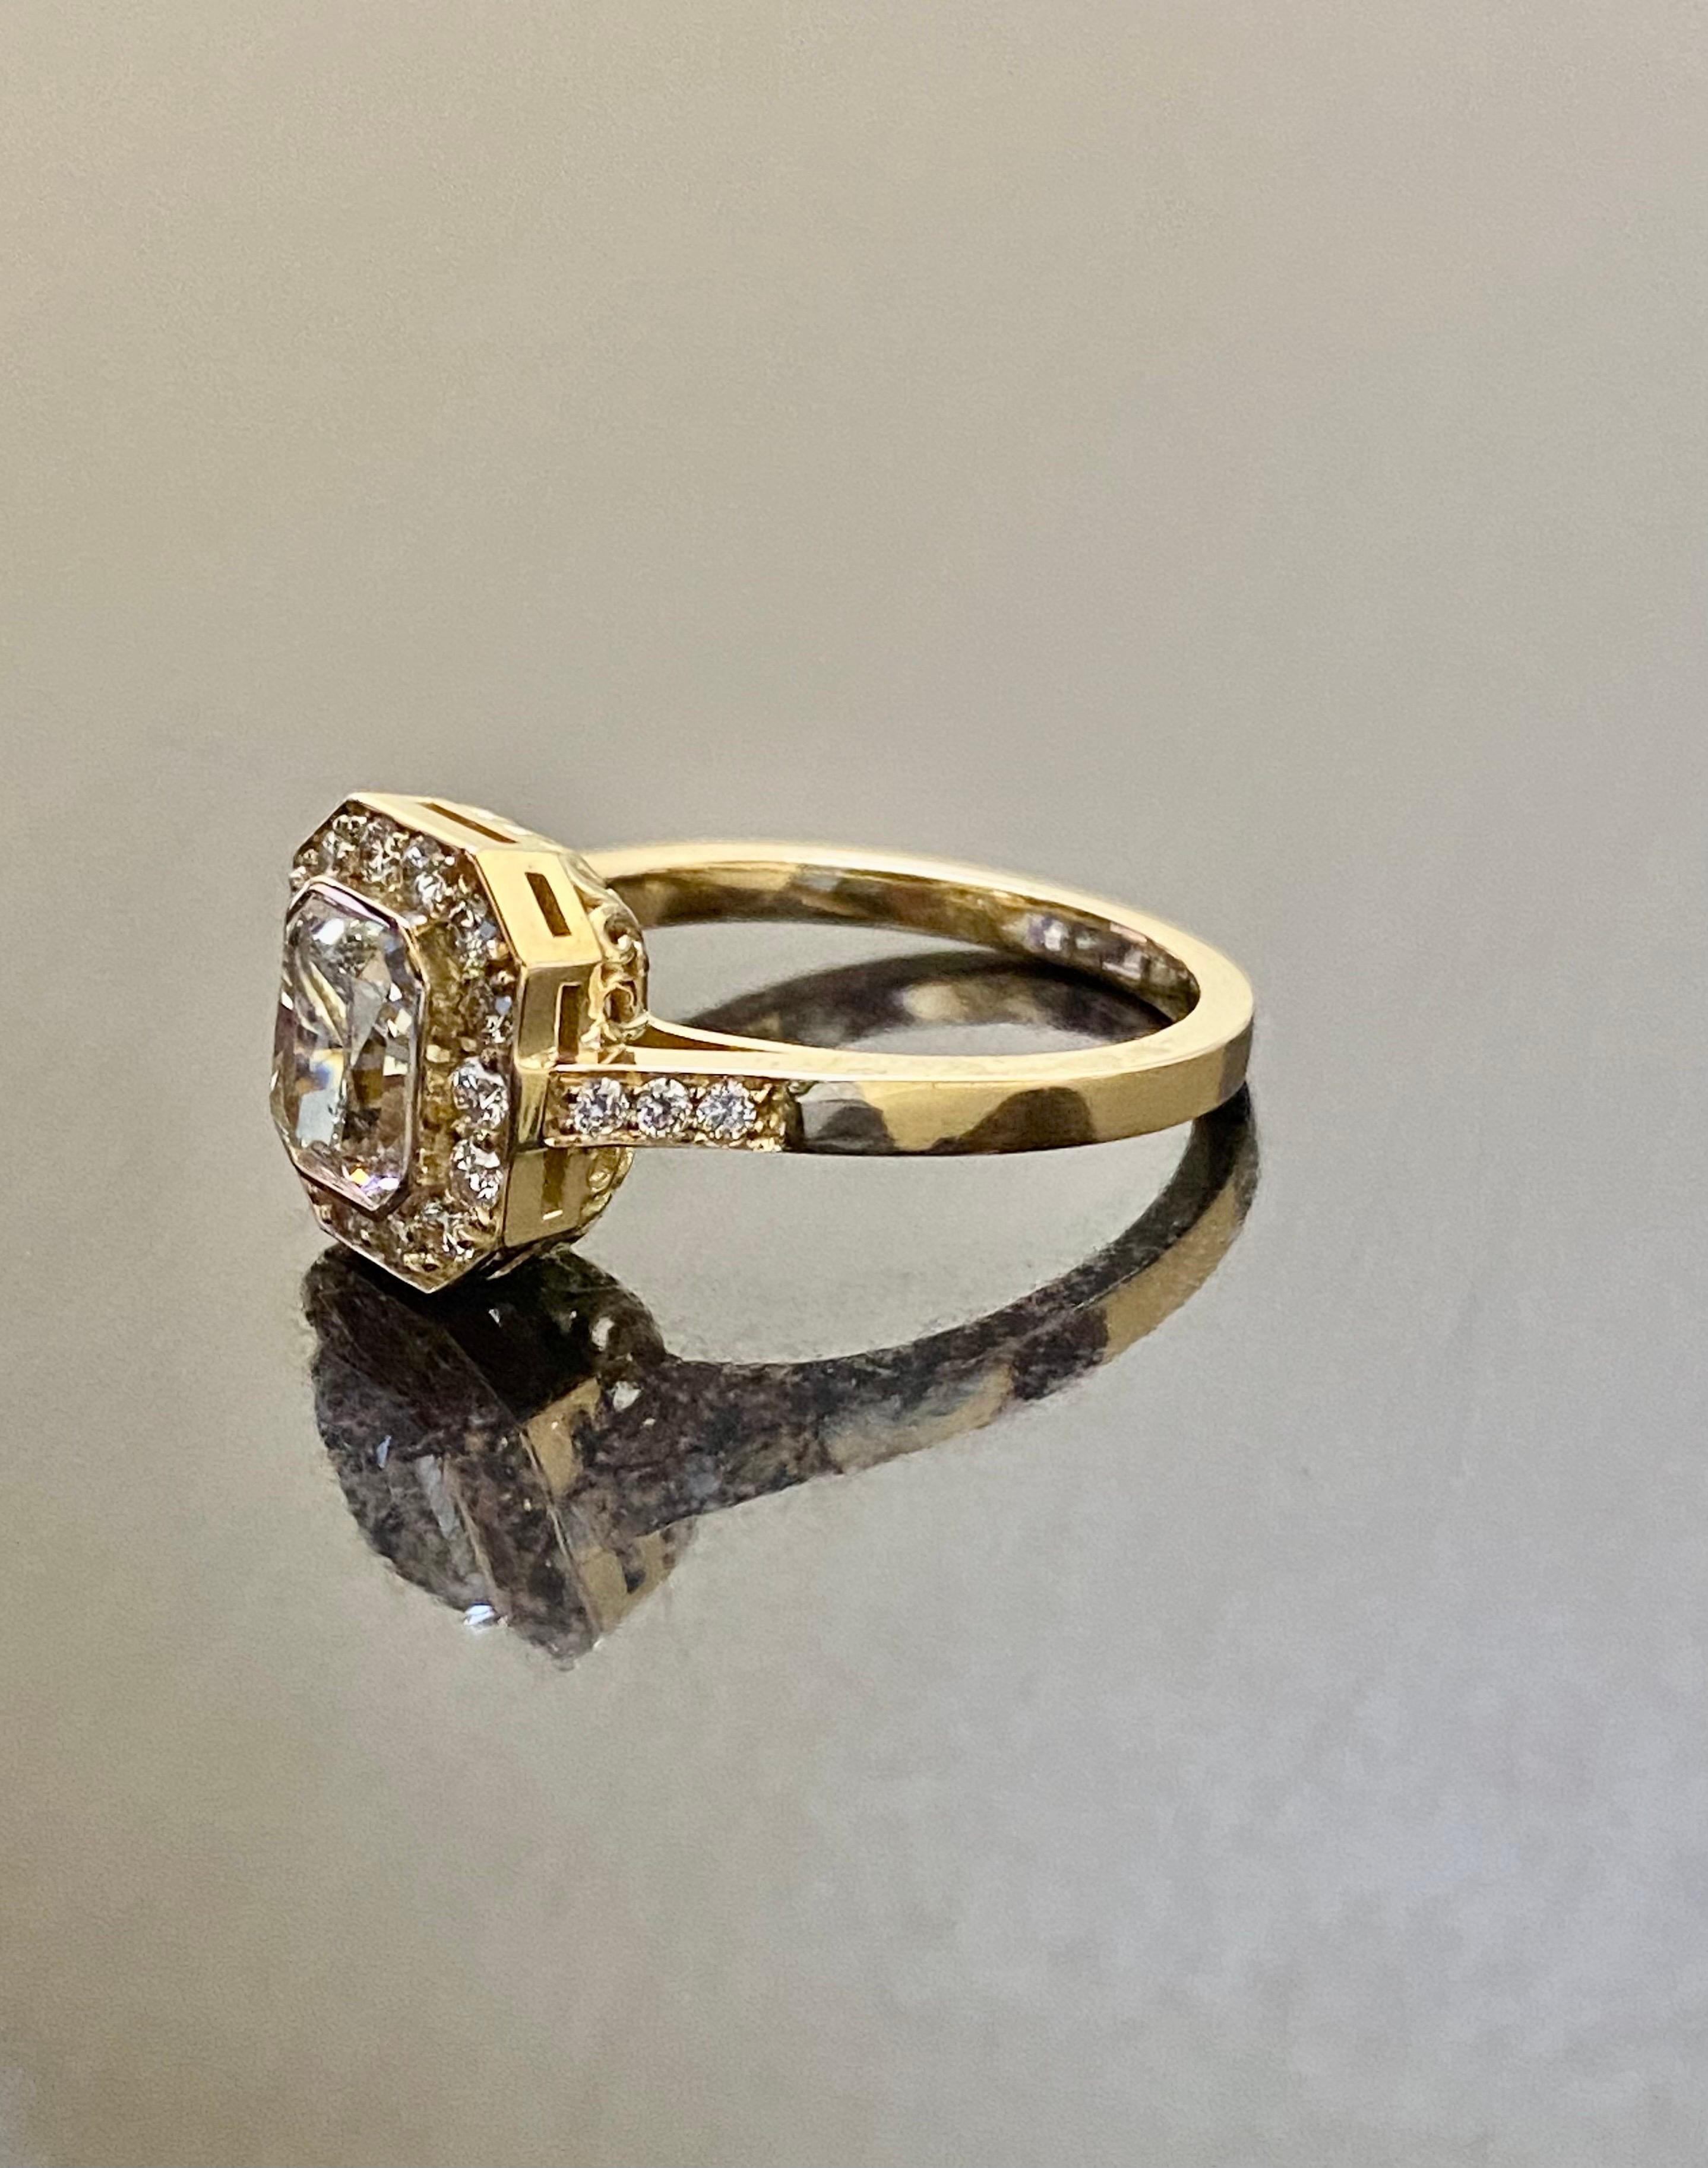 18K Yellow Gold GIA Certified 1.50 Carat Radiant Cut Diamond Ring For Sale 3